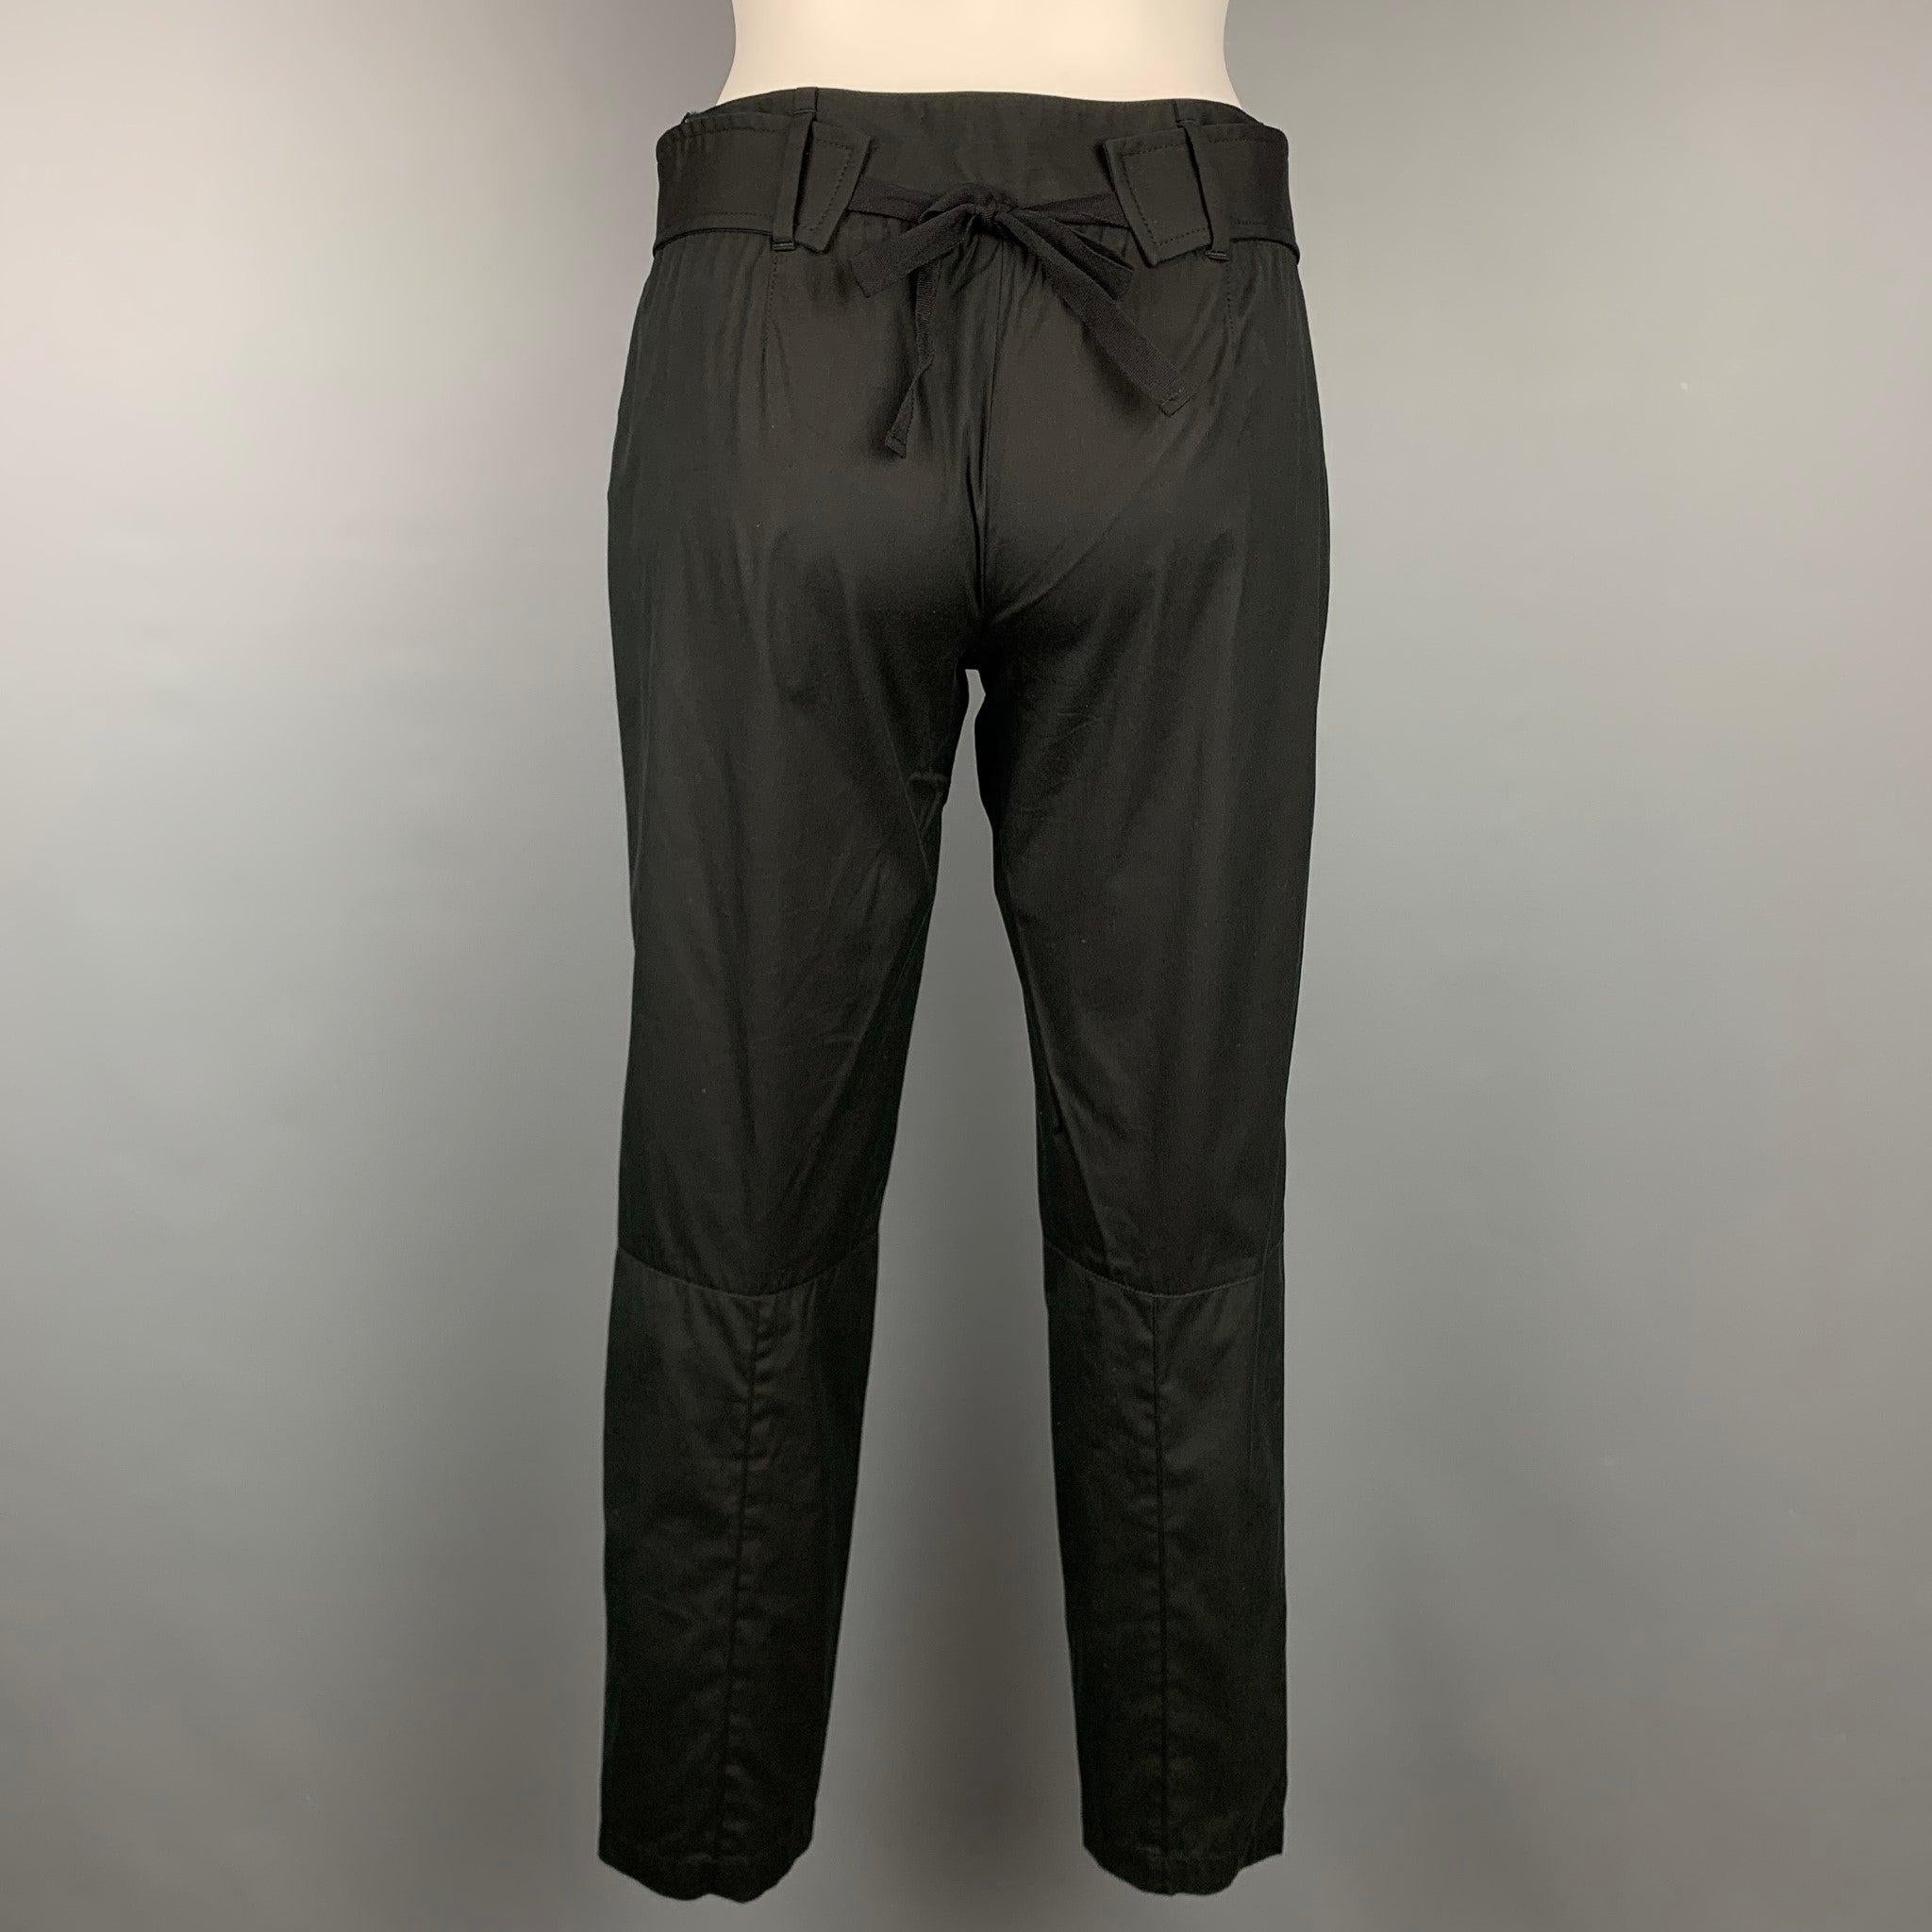 PRADA Size 2 Black Poplin Cotton Blend Belted Casual Pants In Good Condition For Sale In San Francisco, CA